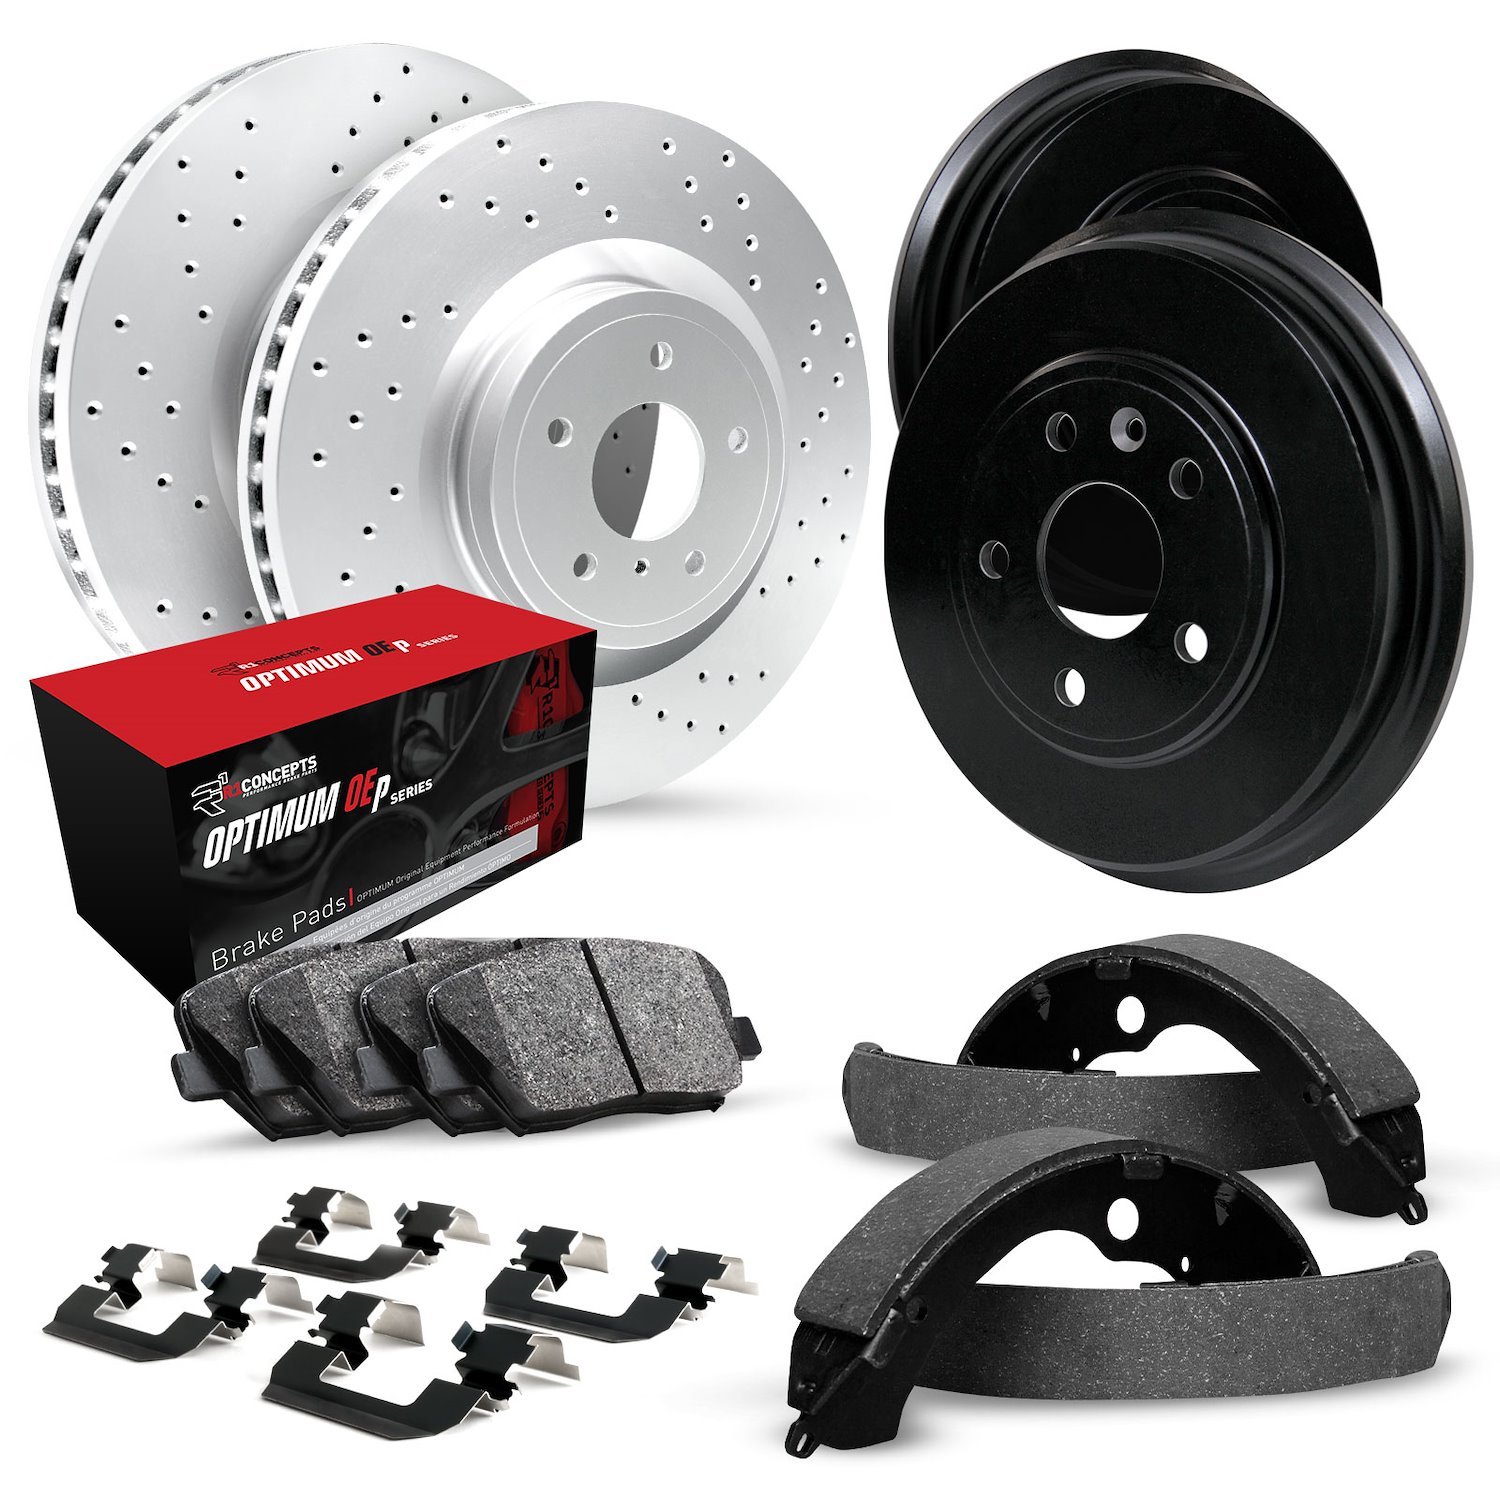 GEO-Carbon Drilled Brake Rotor & Drum Set w/Optimum OE Pads, Shoes, & Hardware, 1992-2000 GM, Position: Front & Rear